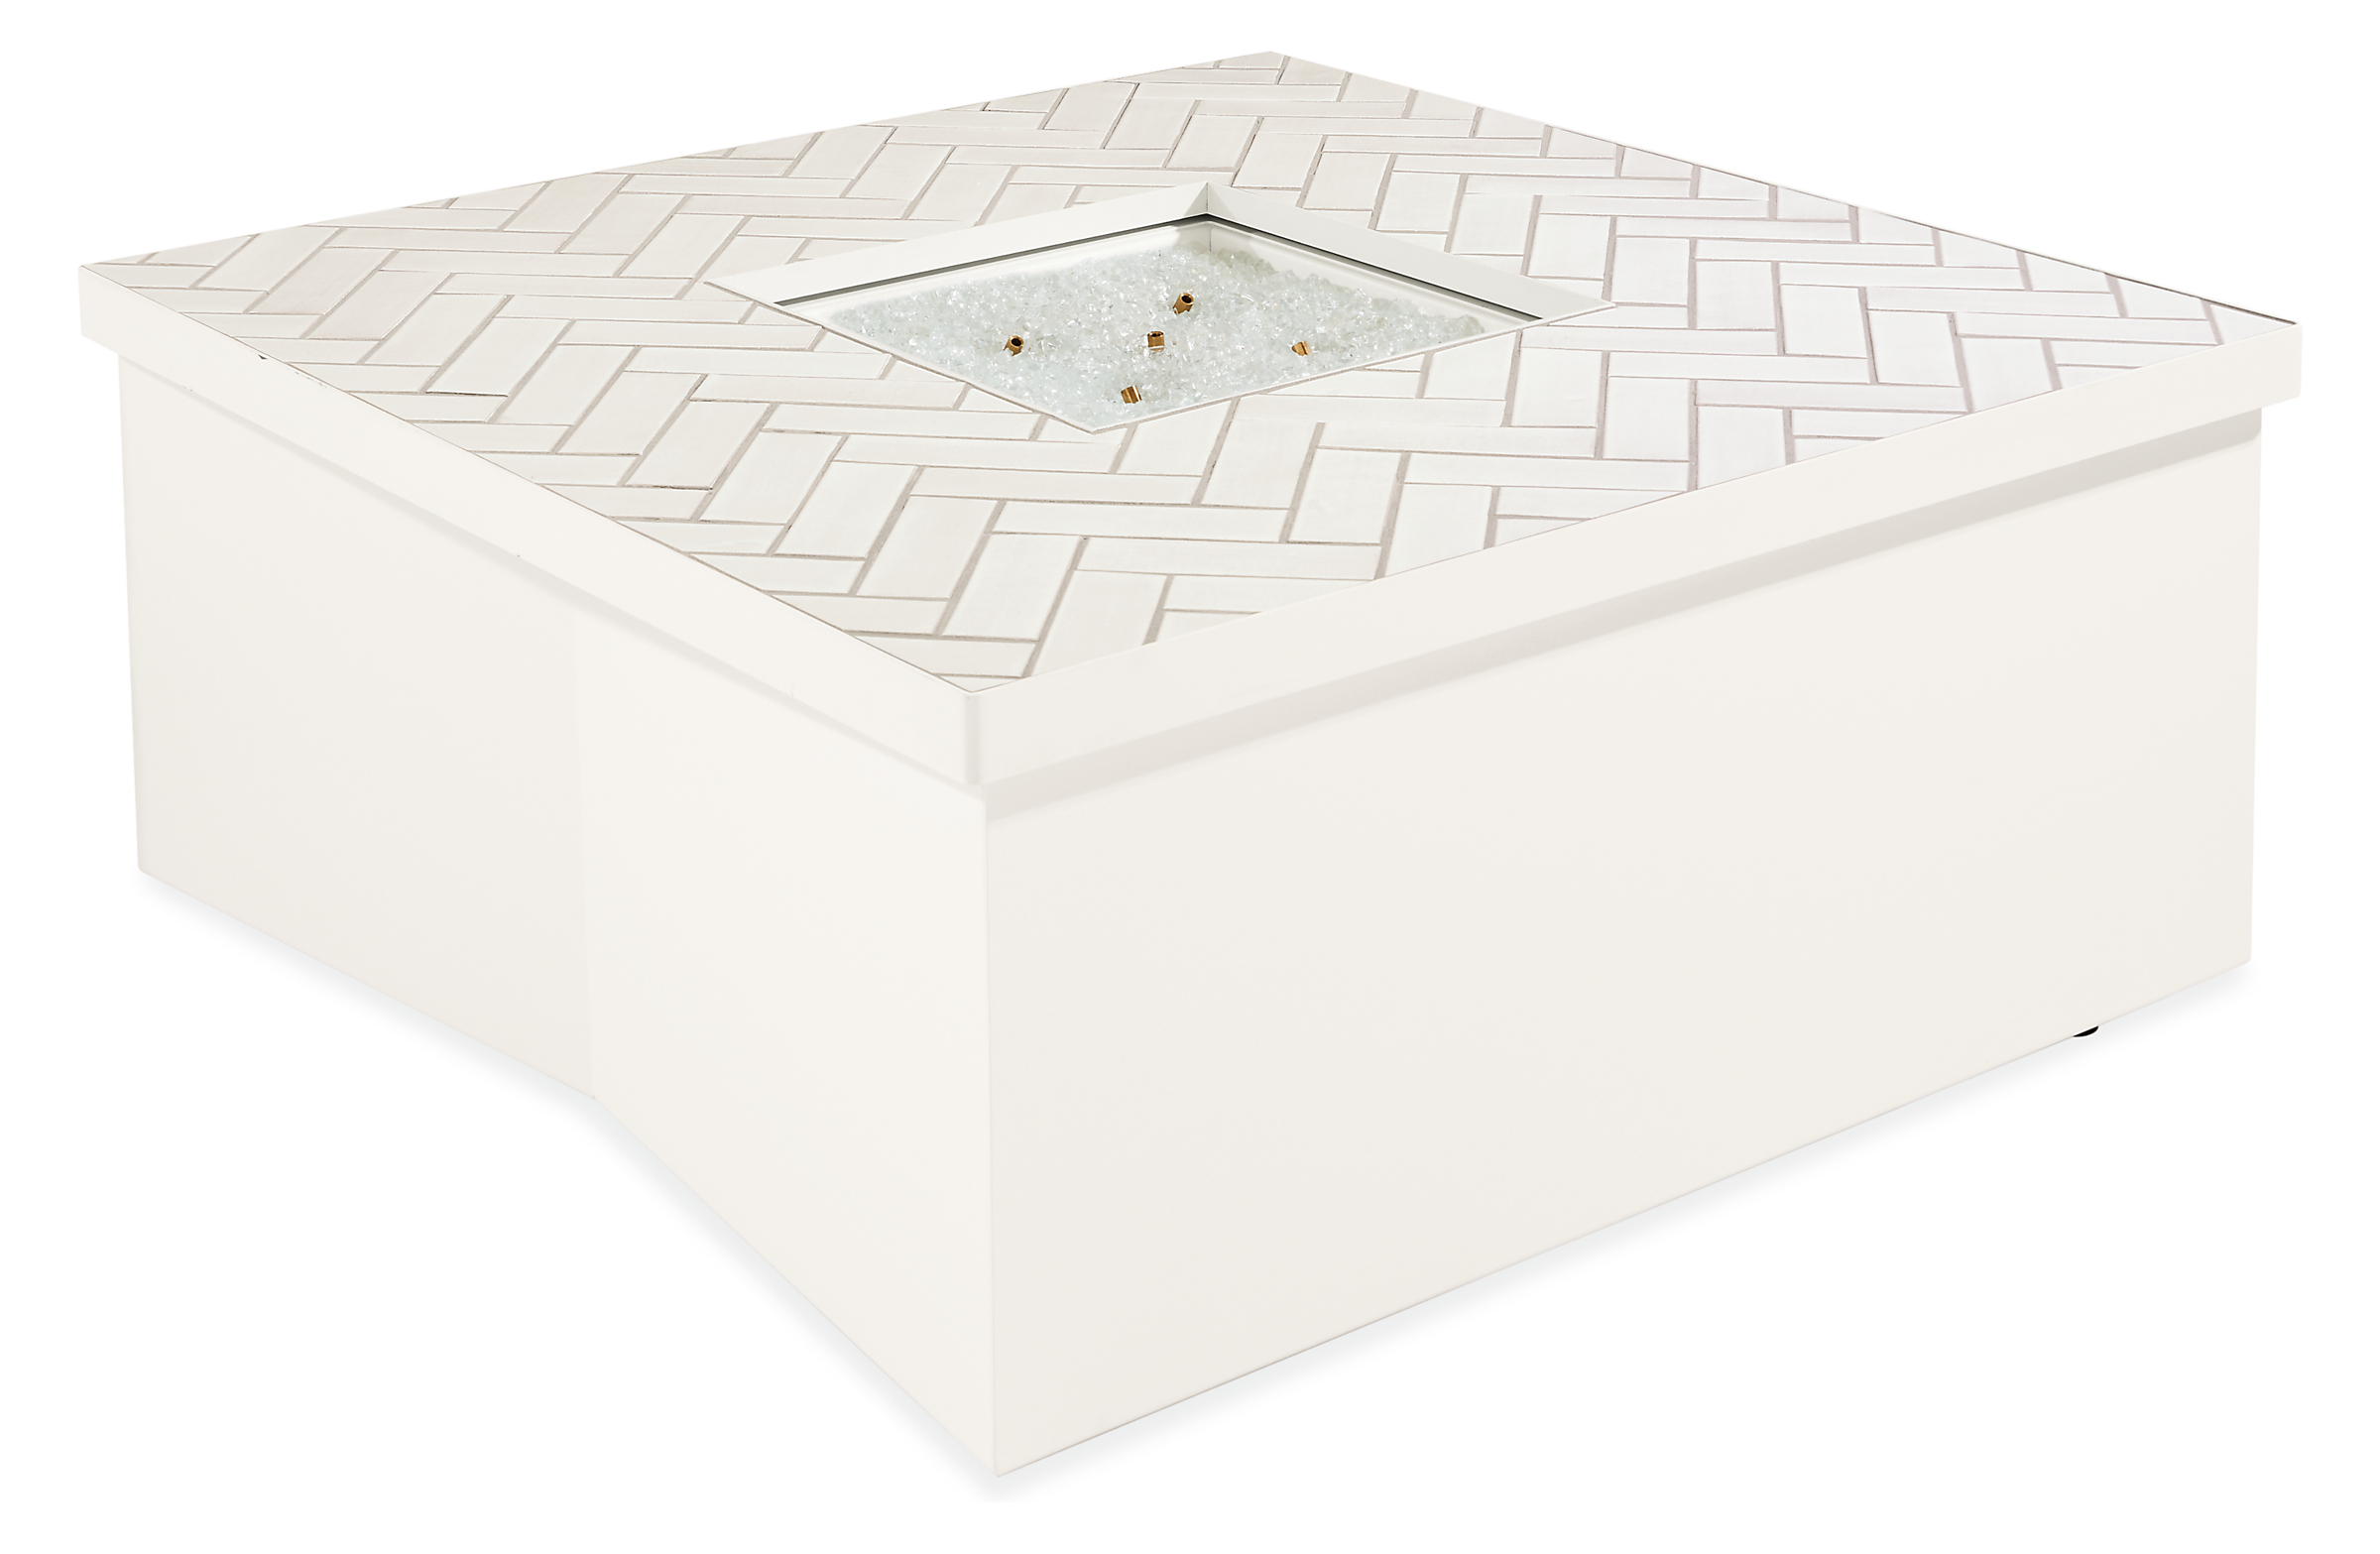 Adara 37w 37d Outdoor Fire Table in White with Tile Top & Natural Gas Hook-Up